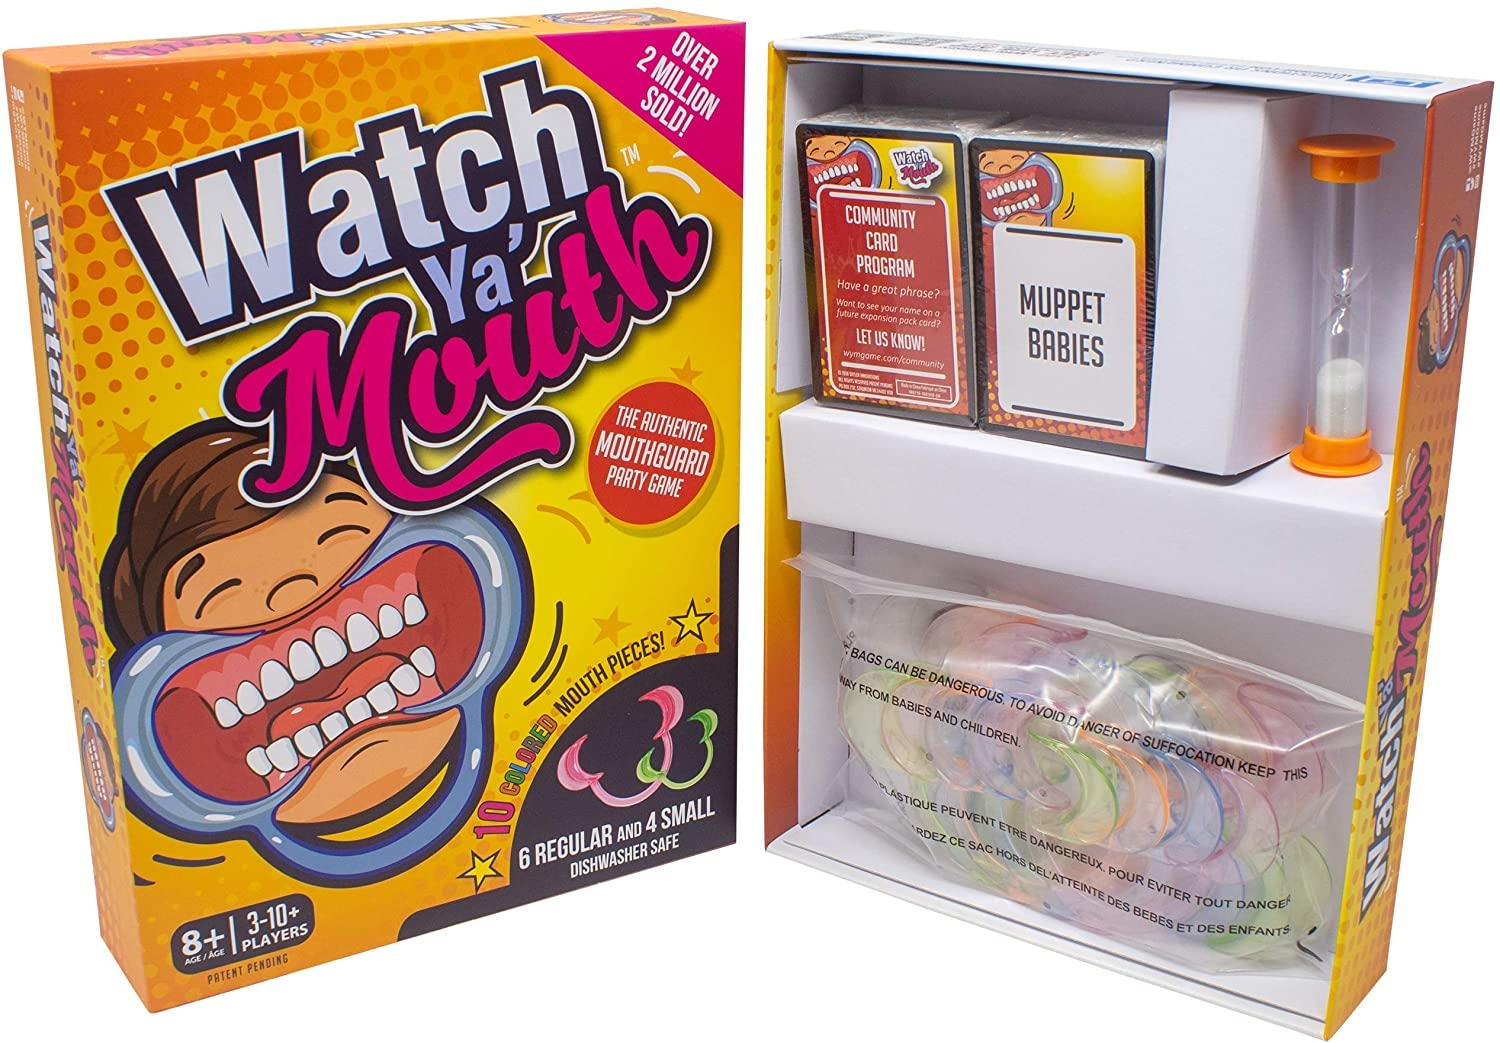 Watch Ya Mouth Family Edition for $10.85